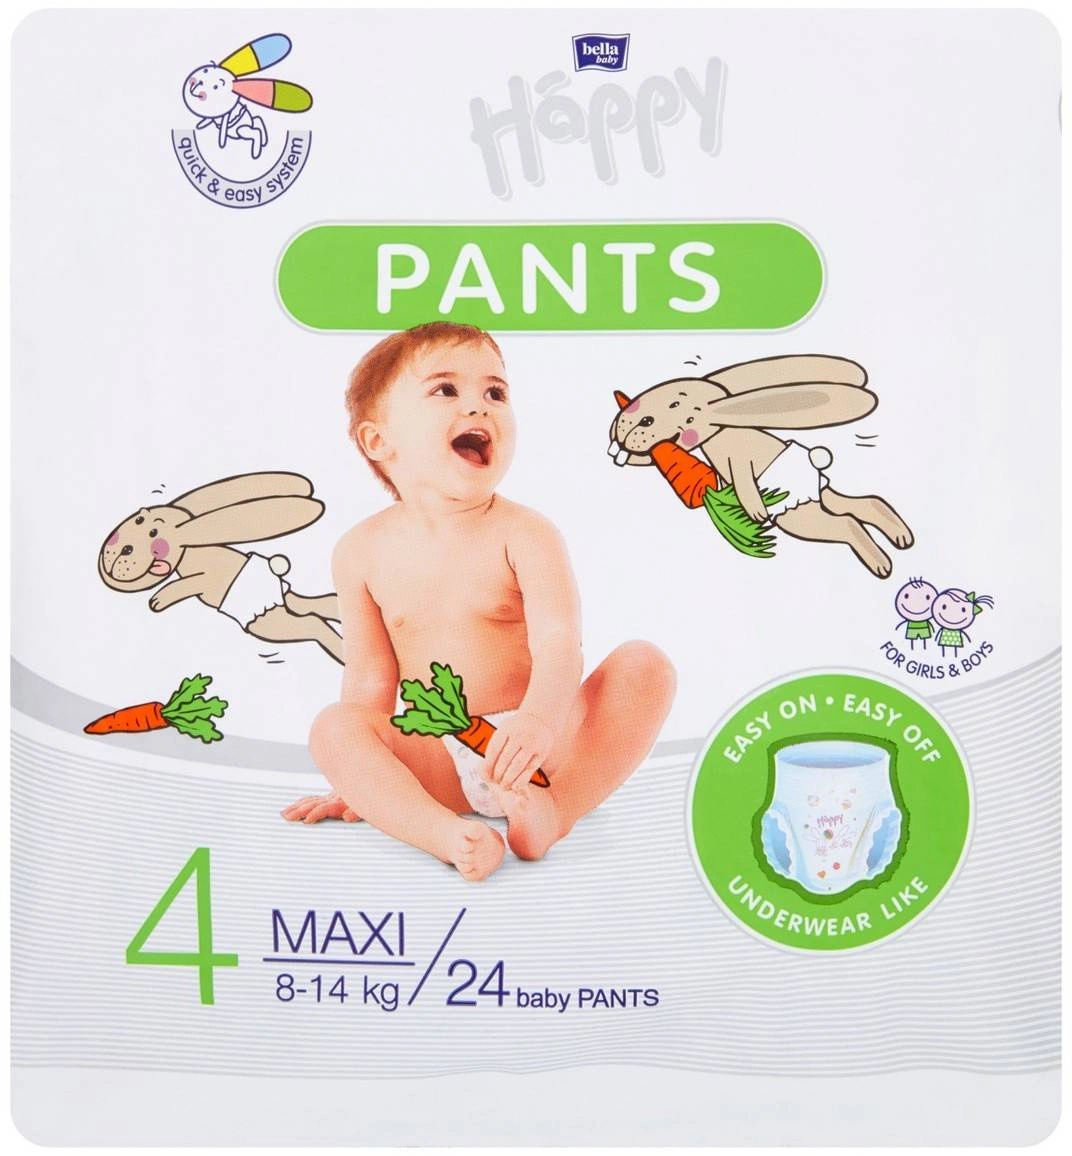 pampers premium care newhow to fix